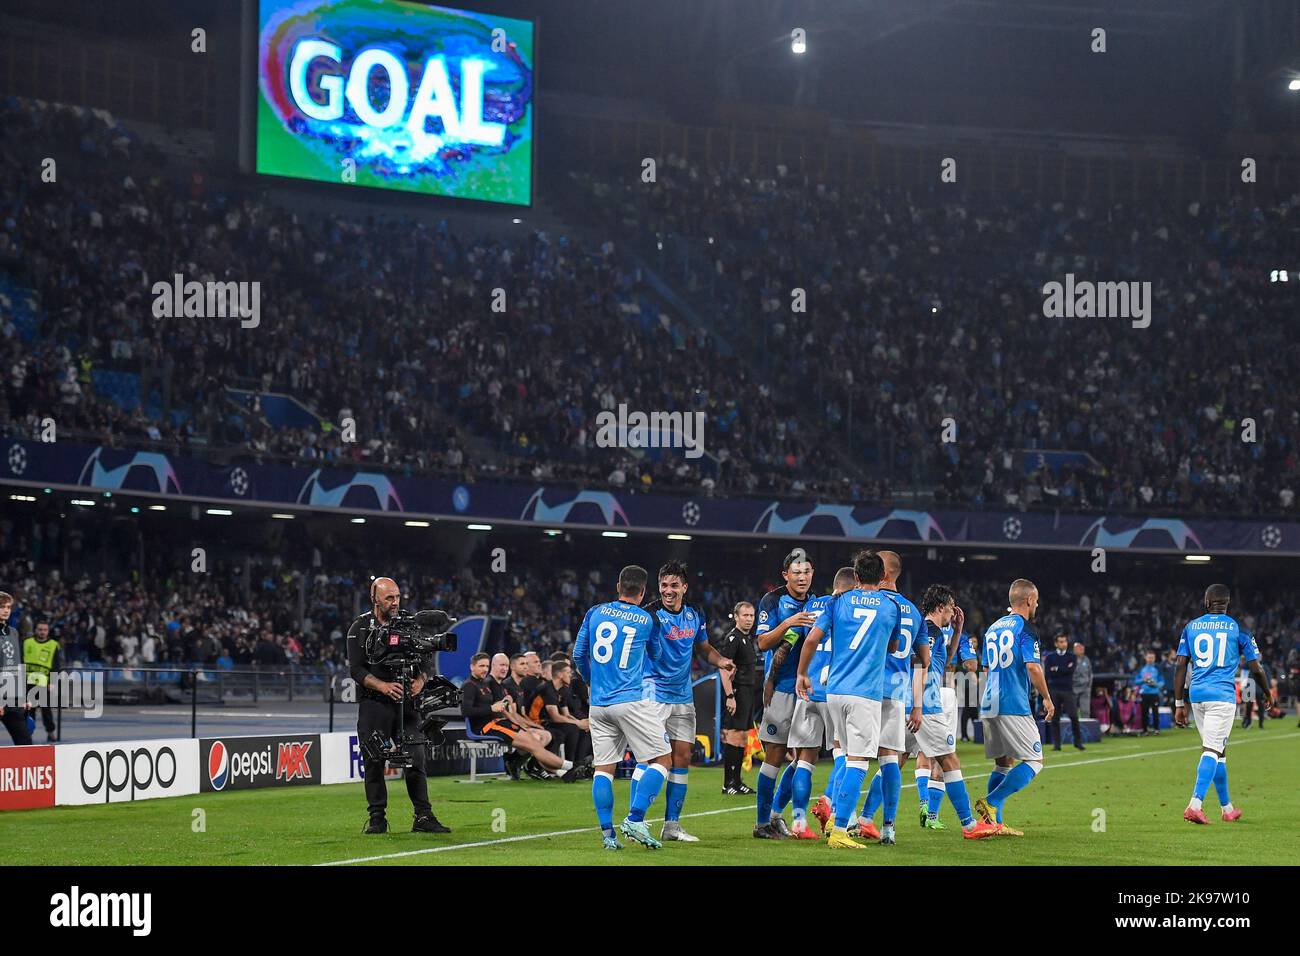 Napoli, Italy. 26th Oct, 2022. Giovanni Simeone of SSC Napoli celebrates with team mates after scoring the goal of 1-0 during the Champions League Group A football match between SSC Napoli and Rangers FC at Diego Armando Maradona stadium in Napoli (Italy), October 26th, 2022. Photo Andrea Staccioli/Insidefoto Credit: Insidefoto di andrea staccioli/Alamy Live News Stock Photo